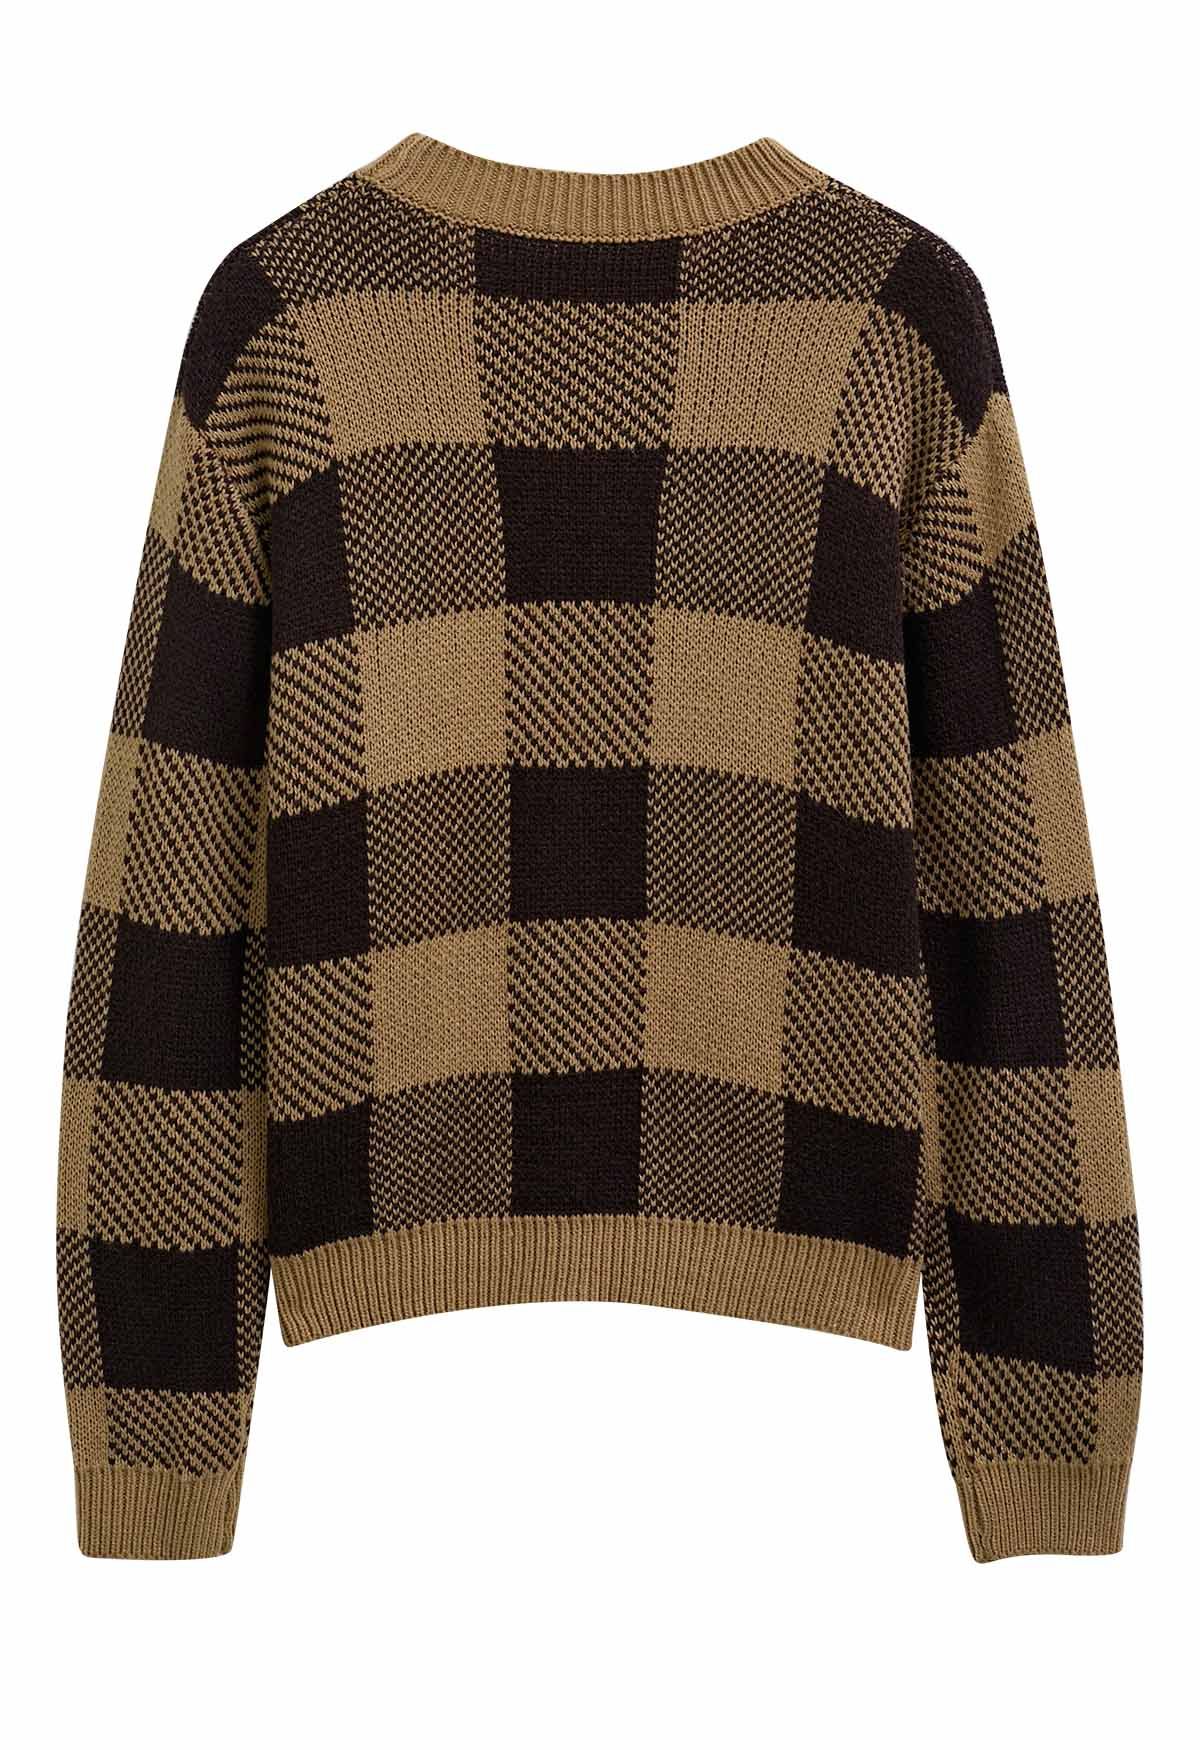 Houndstooth Check Pattern Knit Sweater